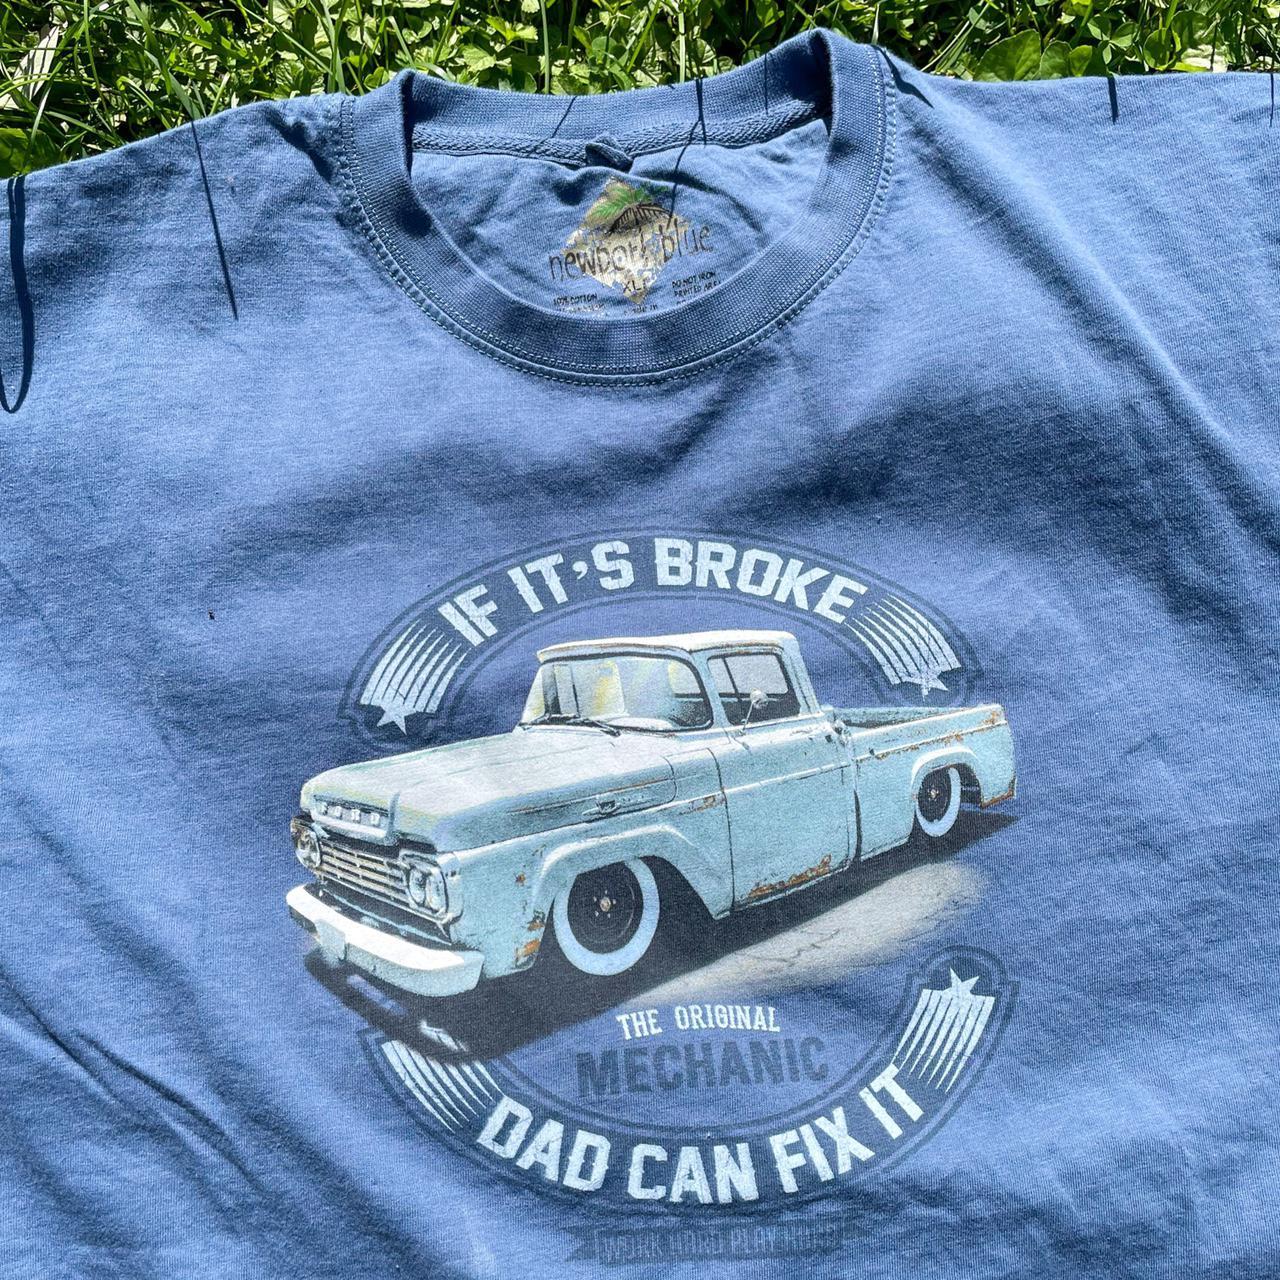 Product Image 4 - Vintage classic car graphic T-shirt🤎

Navy